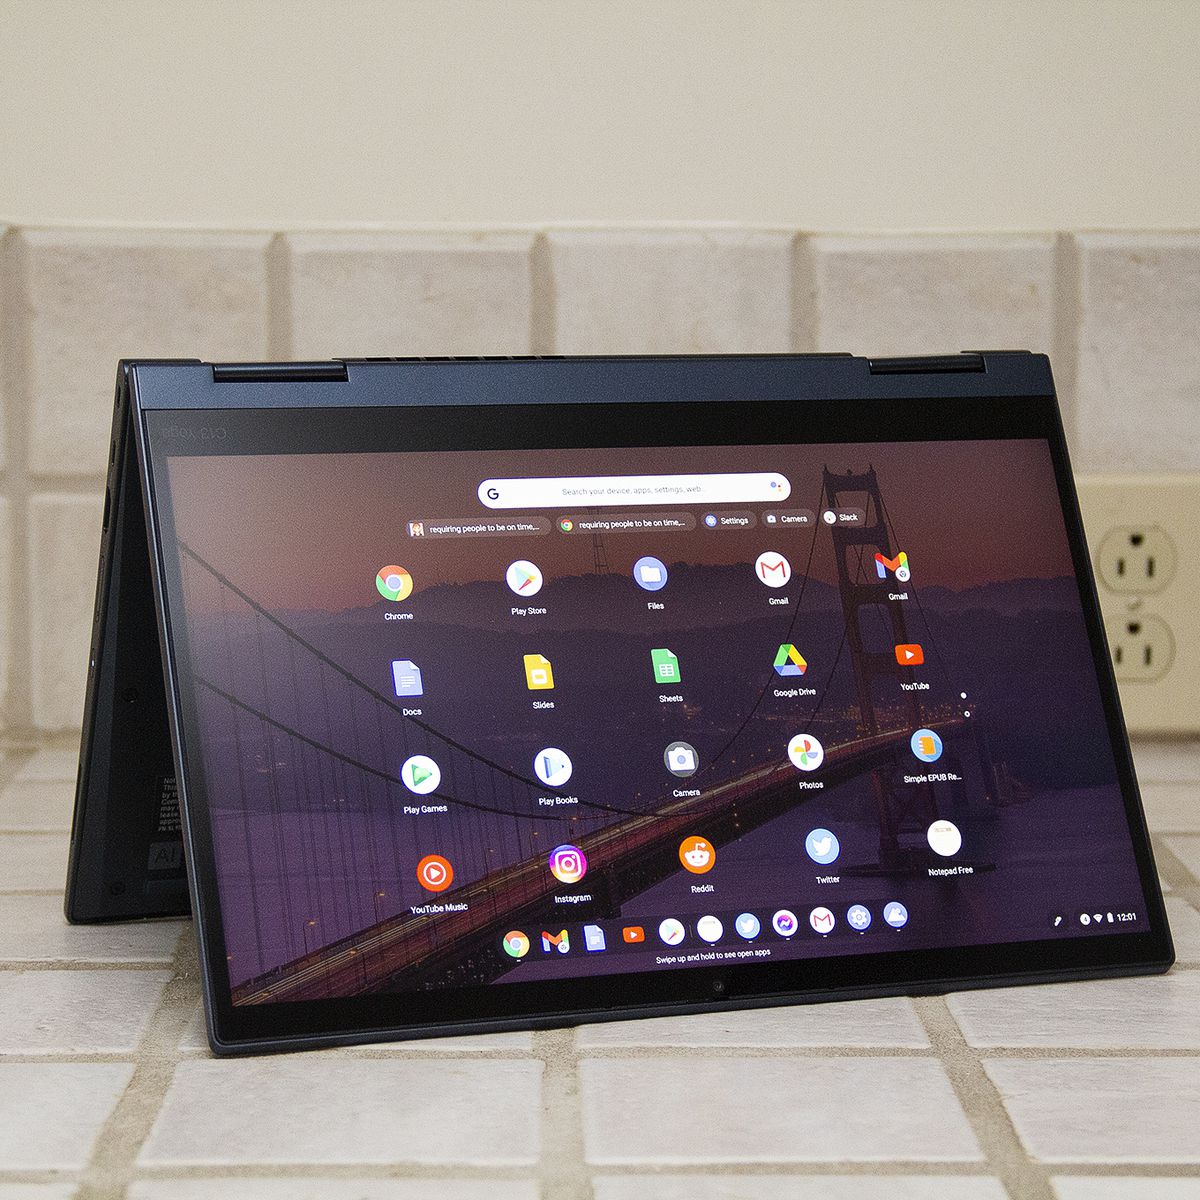 The ThinkPad C13 Yoga Chromebook is in tent mode.  The screen displays a grid of Android apps.